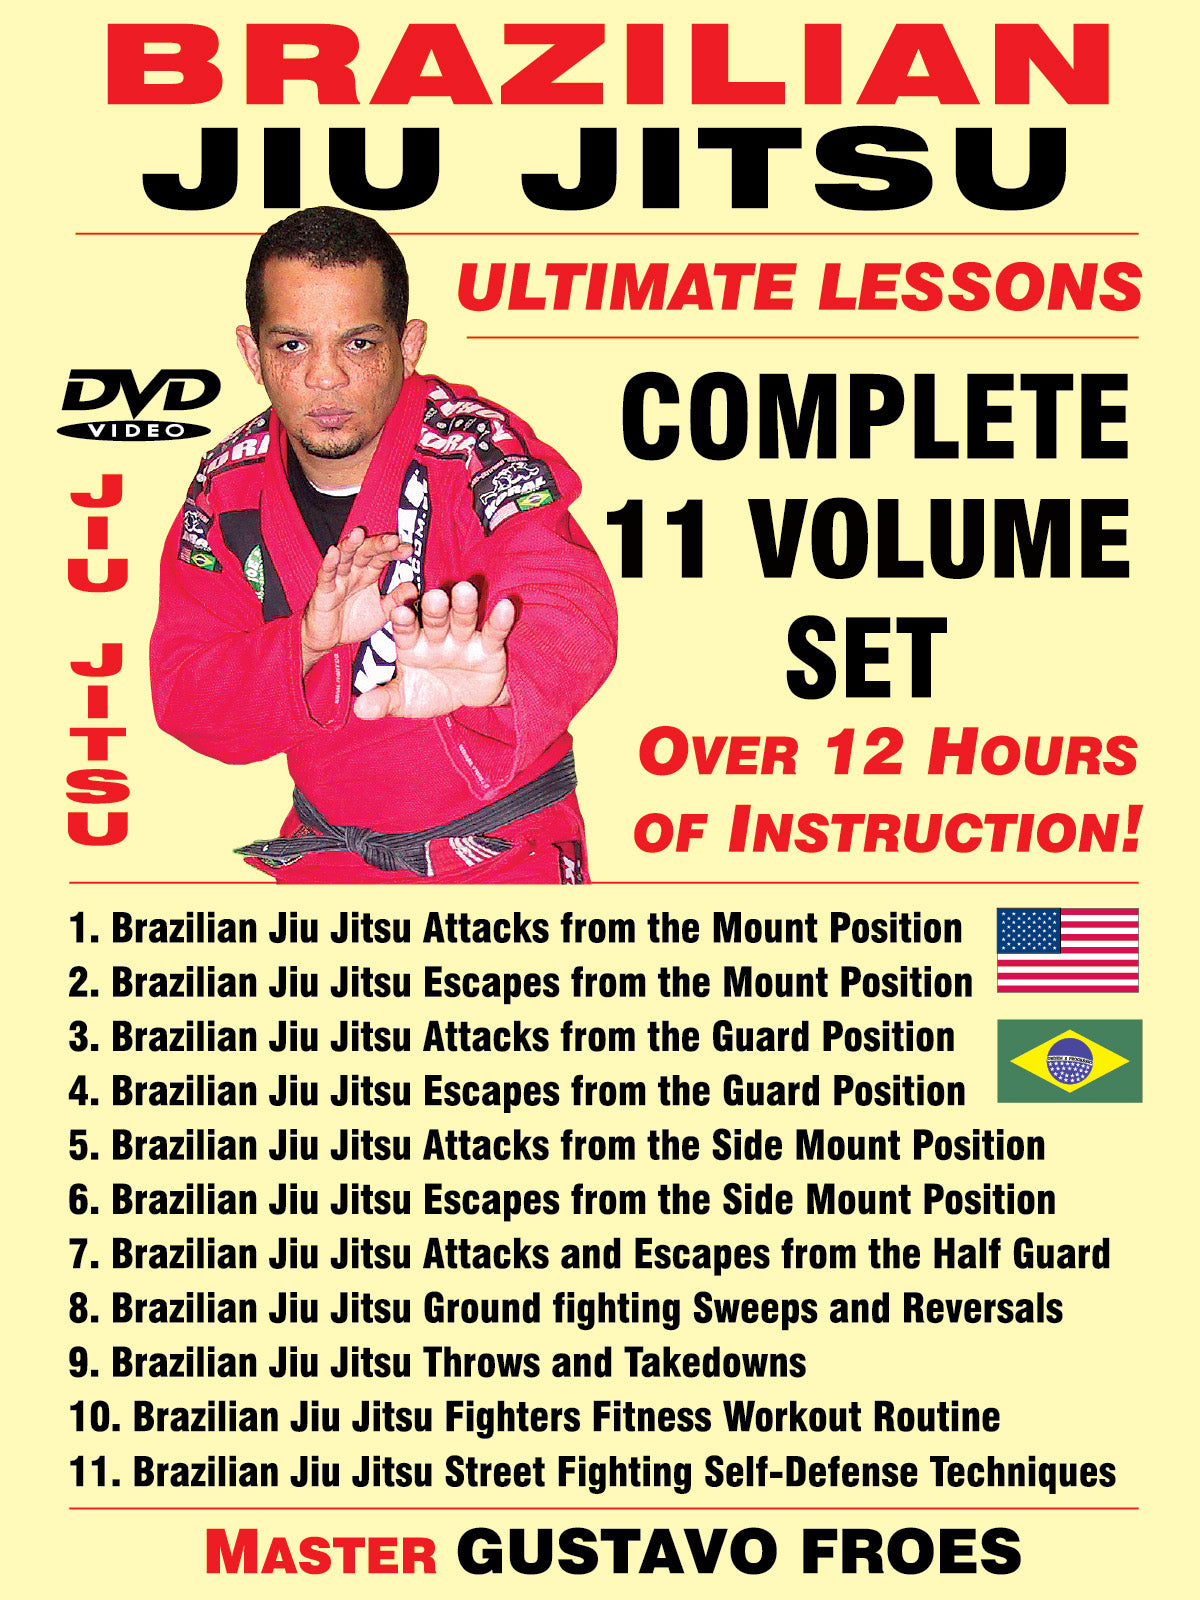 BJJ Ultimate Lessons Complete Series by Gustavo Froes (On Demand)